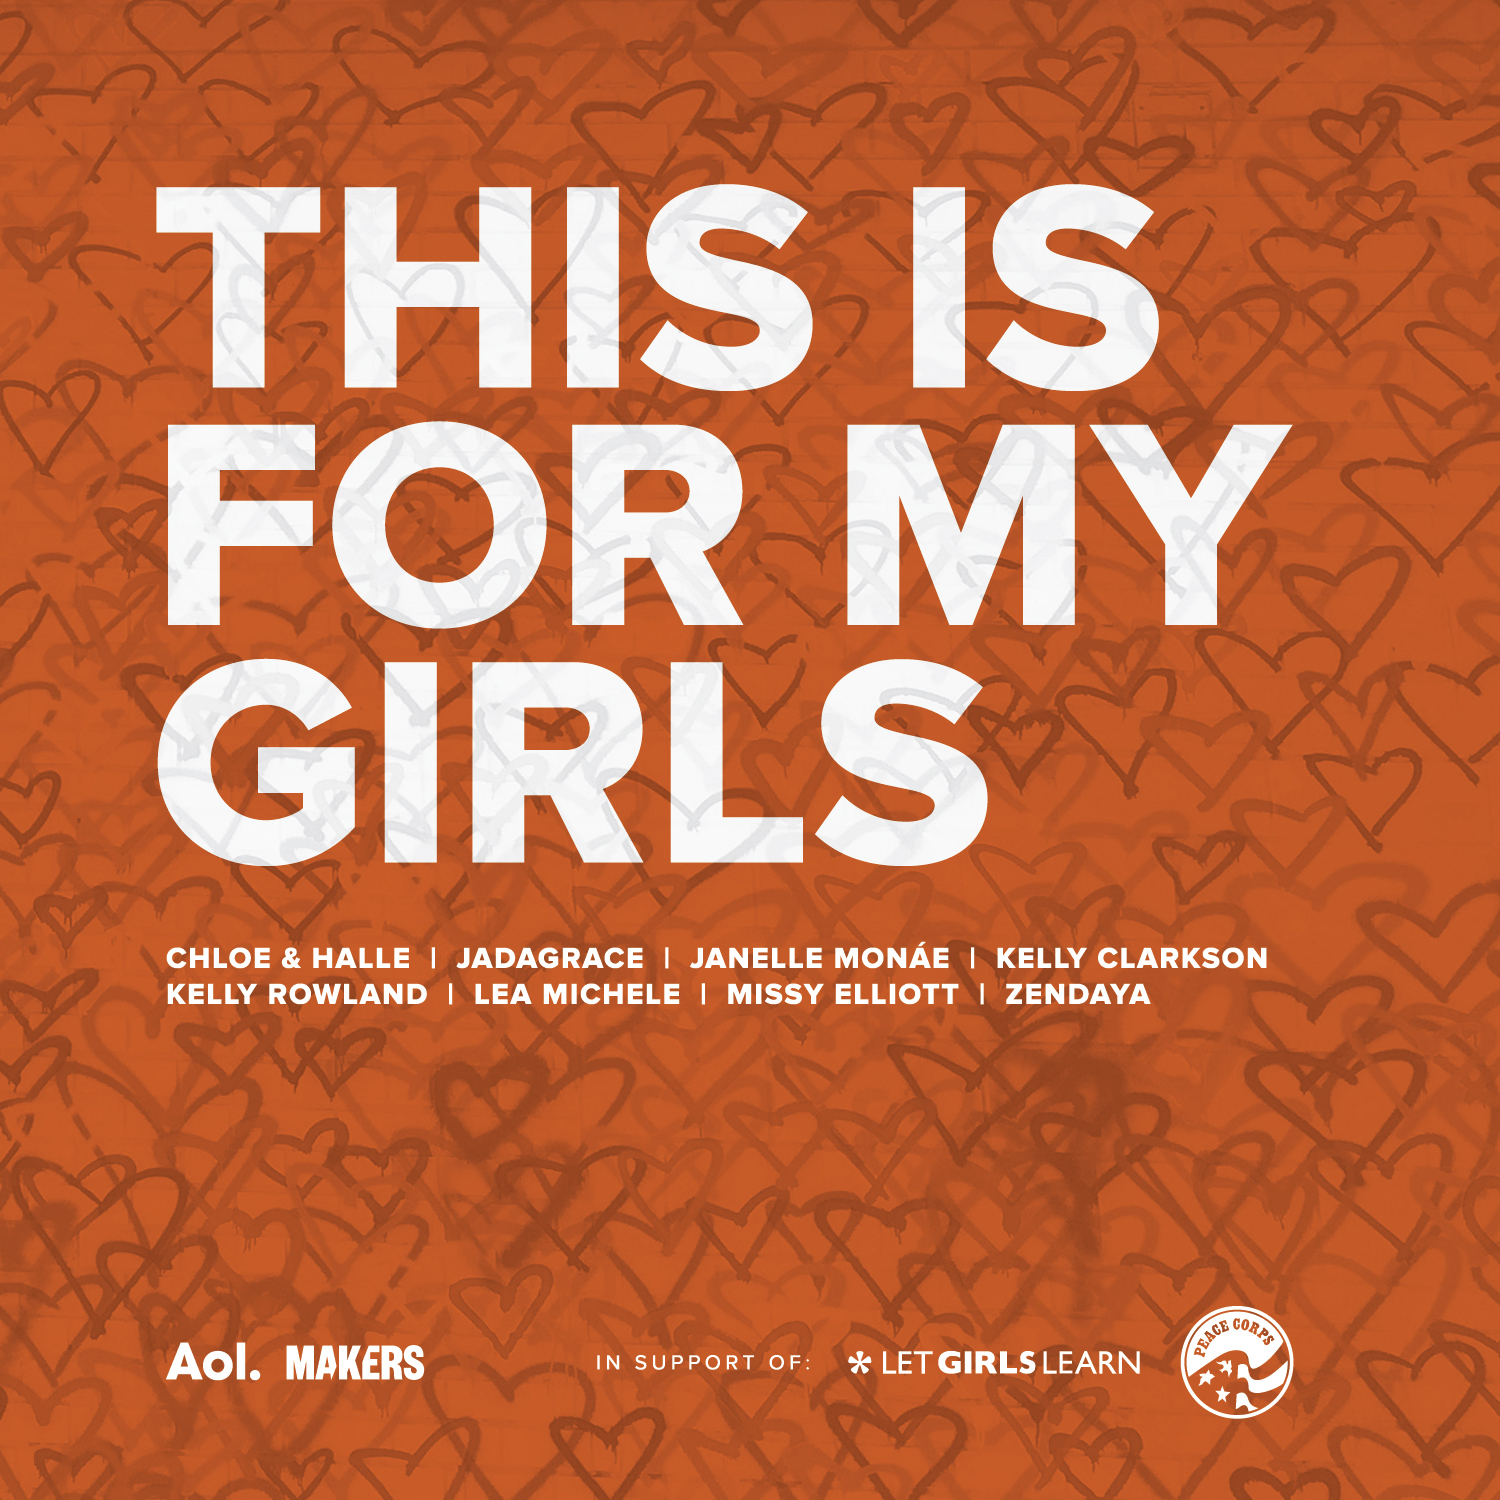 New Music: Michelle Obama – 'This is For My Girls' (Feat. Various Artists) | HipHop ...